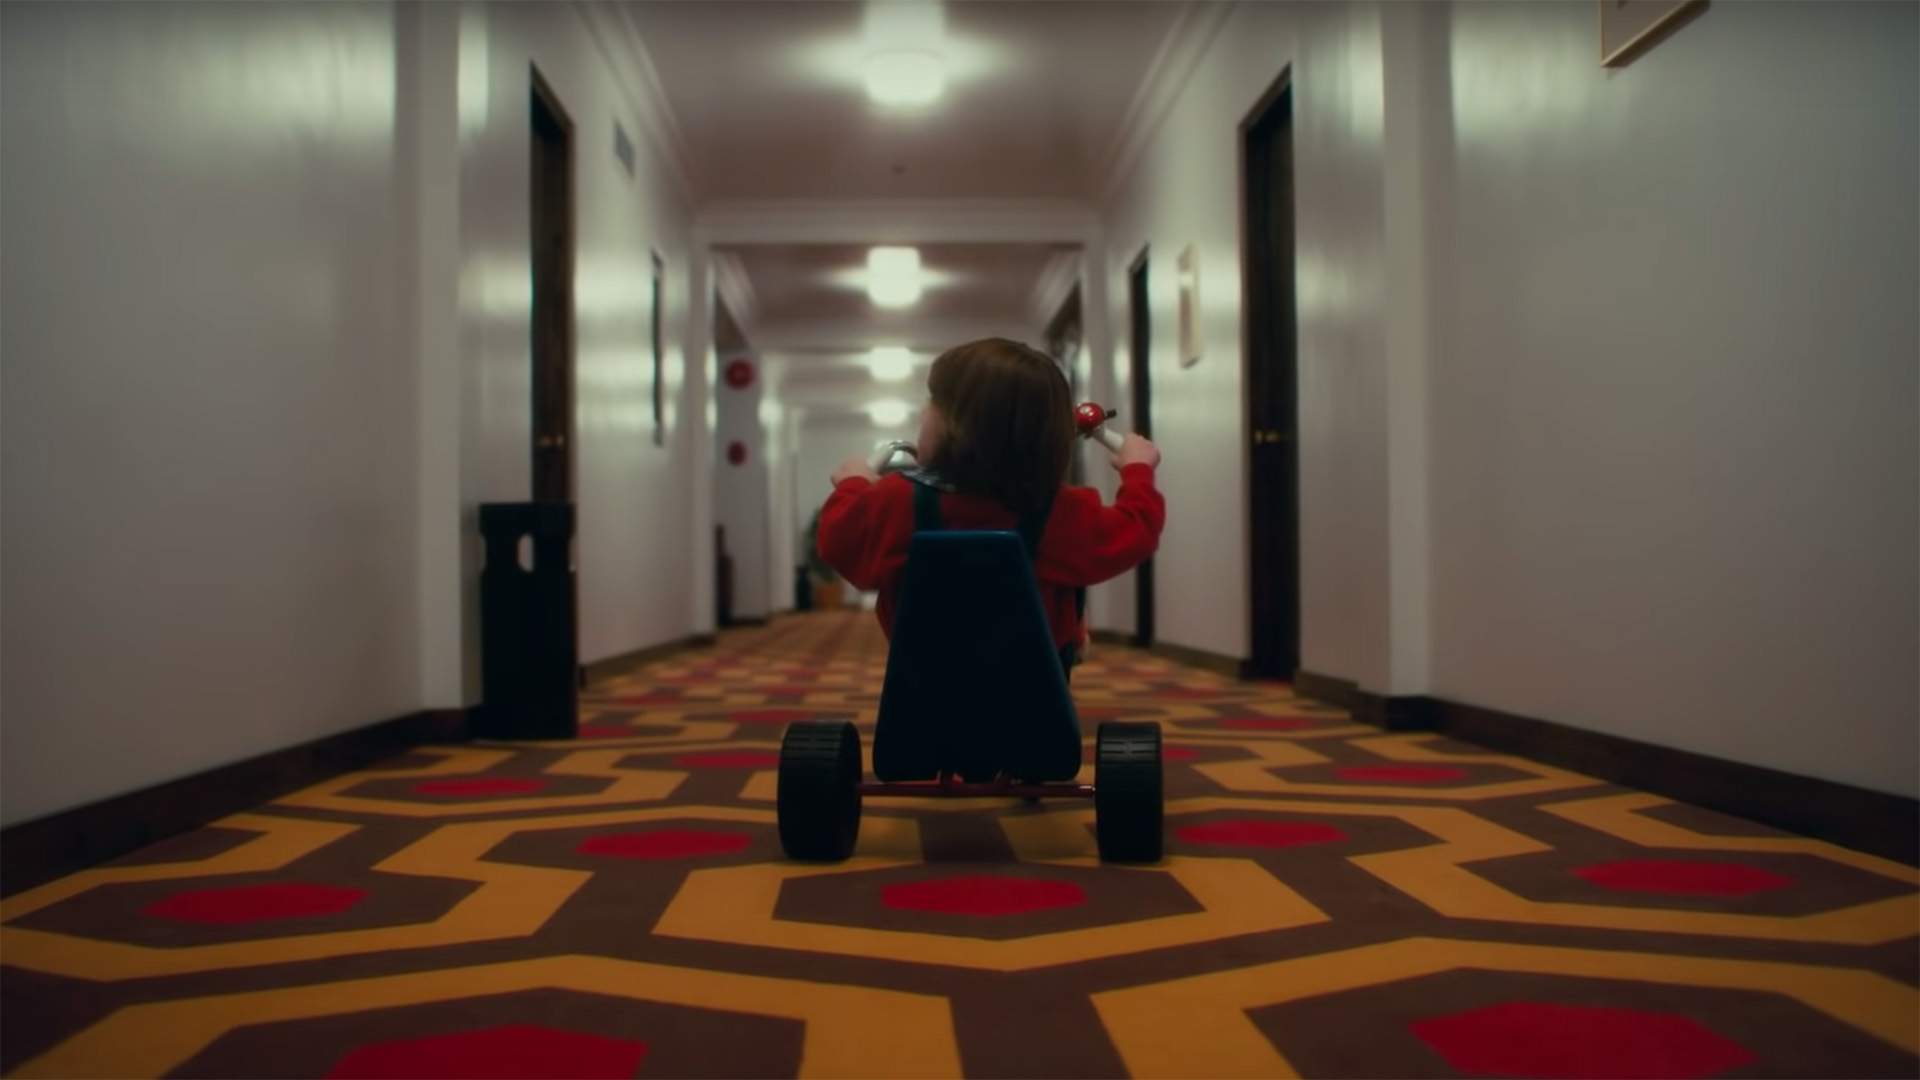 The Unsettling Final Trailer for 'Doctor Sleep' Ramps Up the Scares and References to 'The Shining'